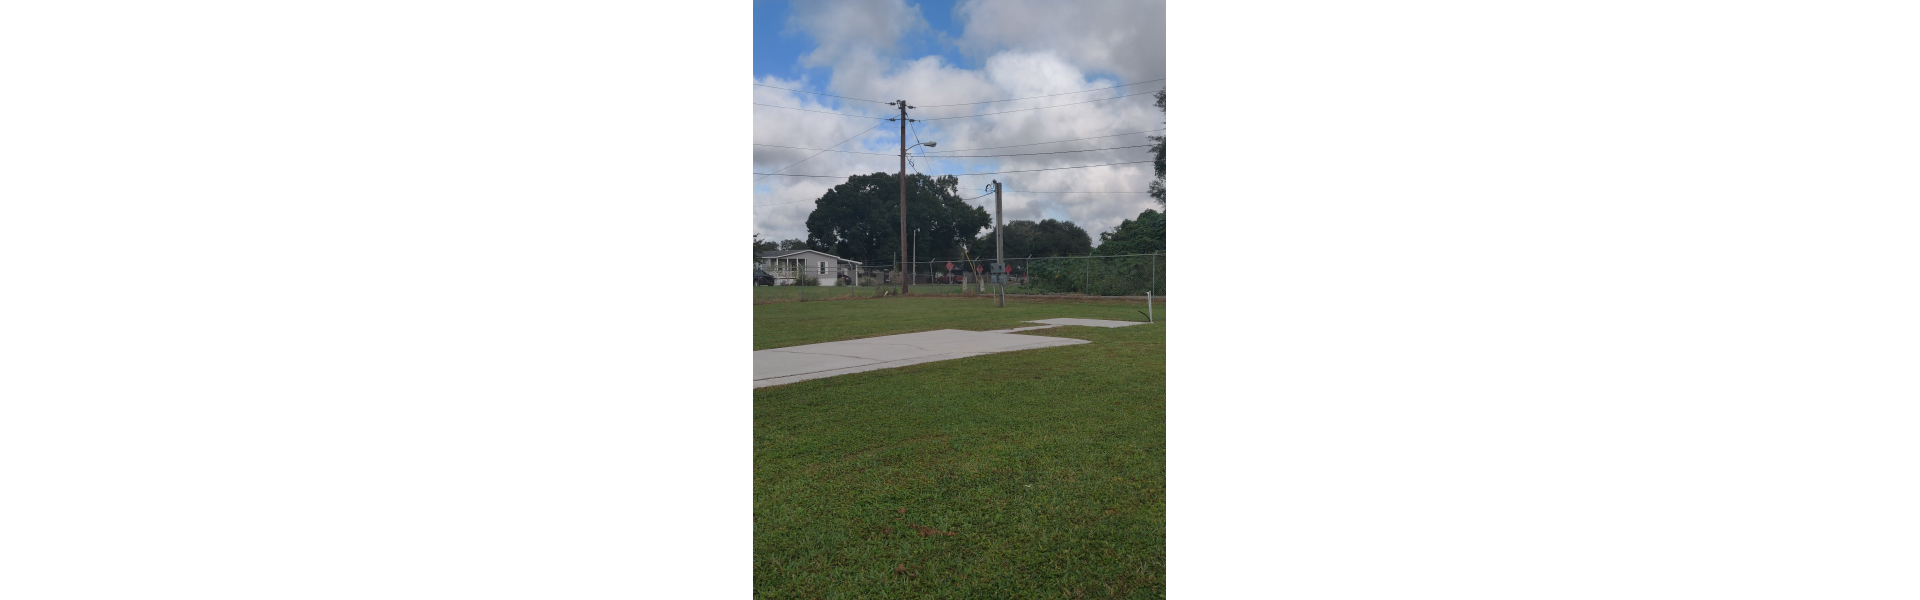 RV Sites Available at Bedrock Colonial Village Lakeland, FL 33815